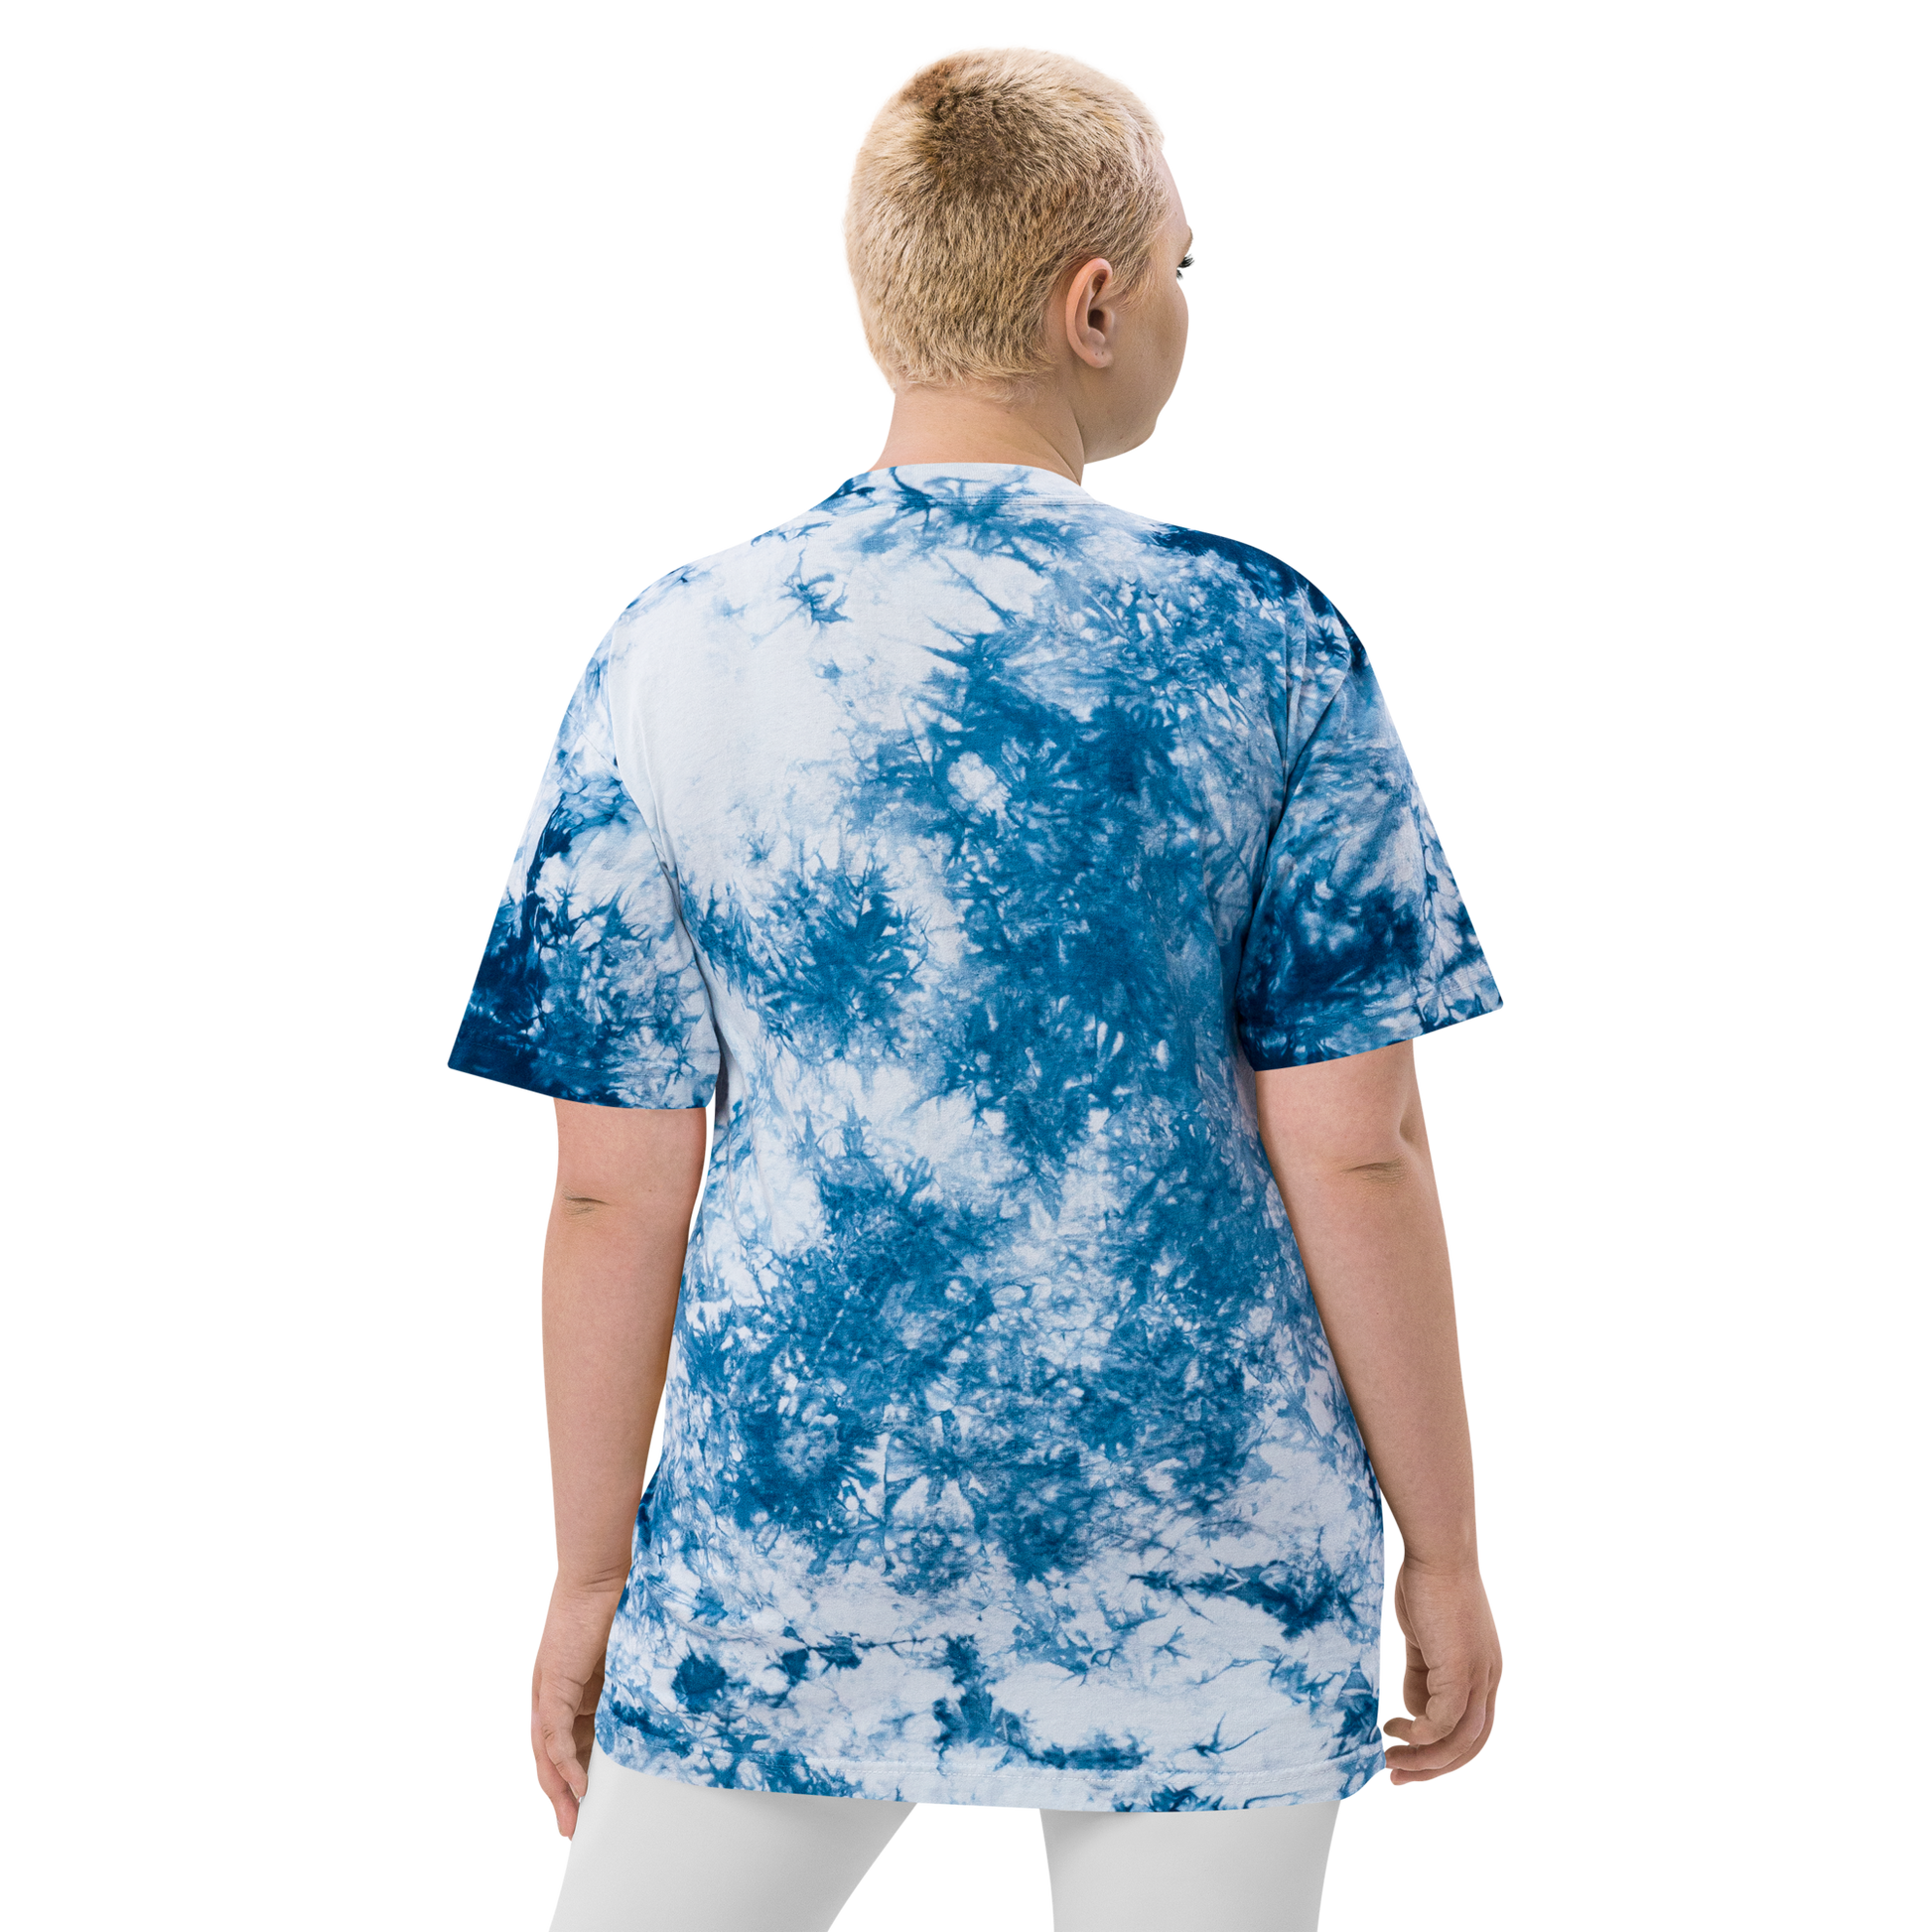 YHM Designs - YQG Windsor Oversized Tie-Dye T-Shirt - Crossed-X Design with Airport Code and Vintage Propliner - White Embroidery - Image 09